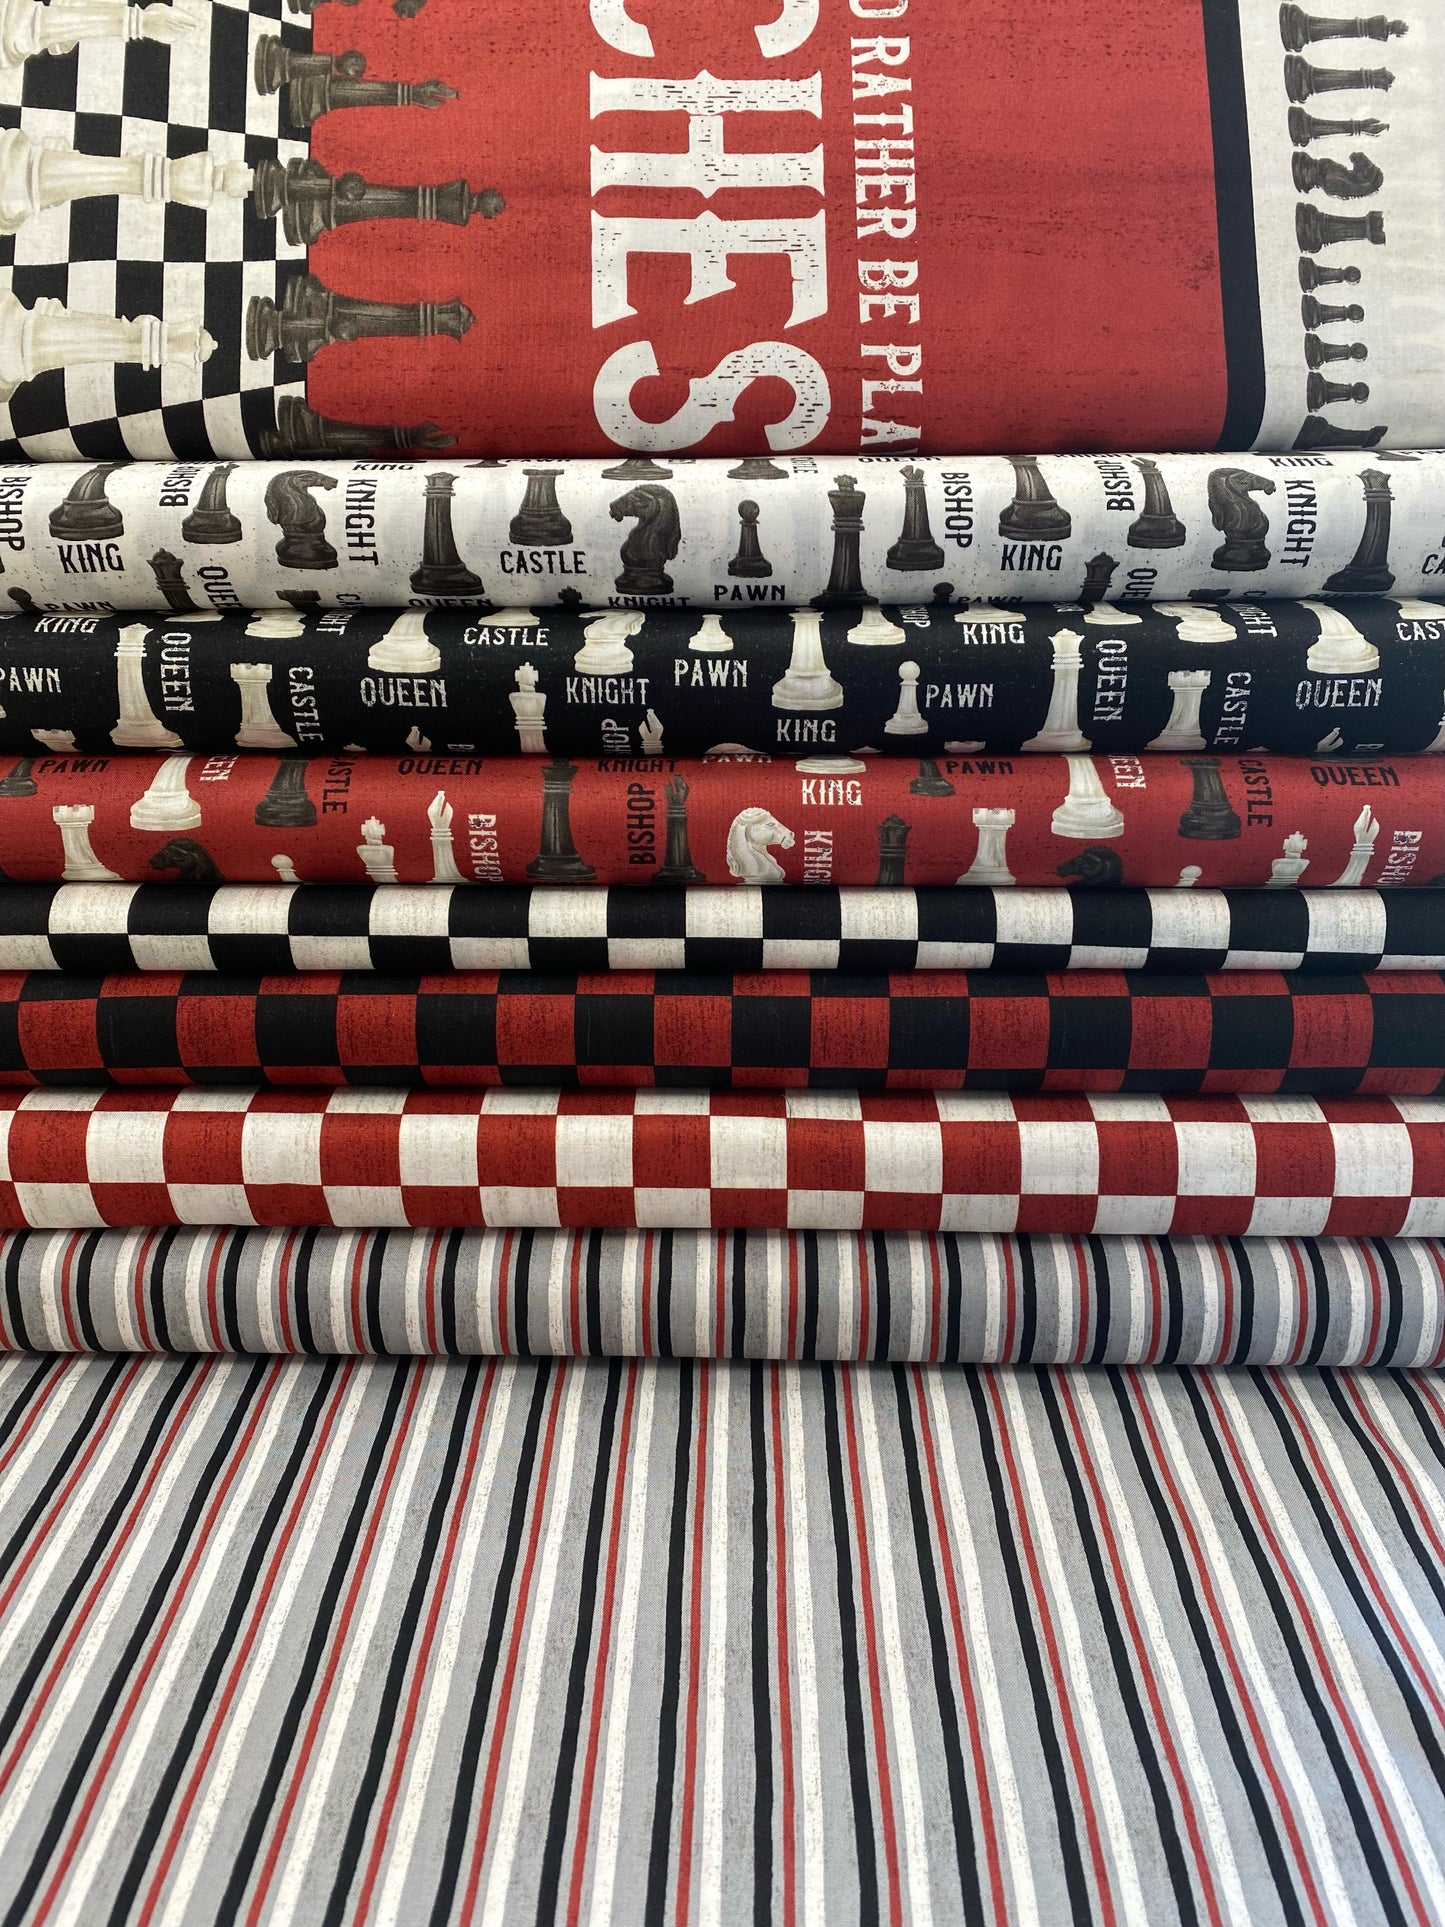 I'd Rather Be Playing Chess by Tara Reed Stripe Gray    C11262-GRAY Cotton Woven Fabric